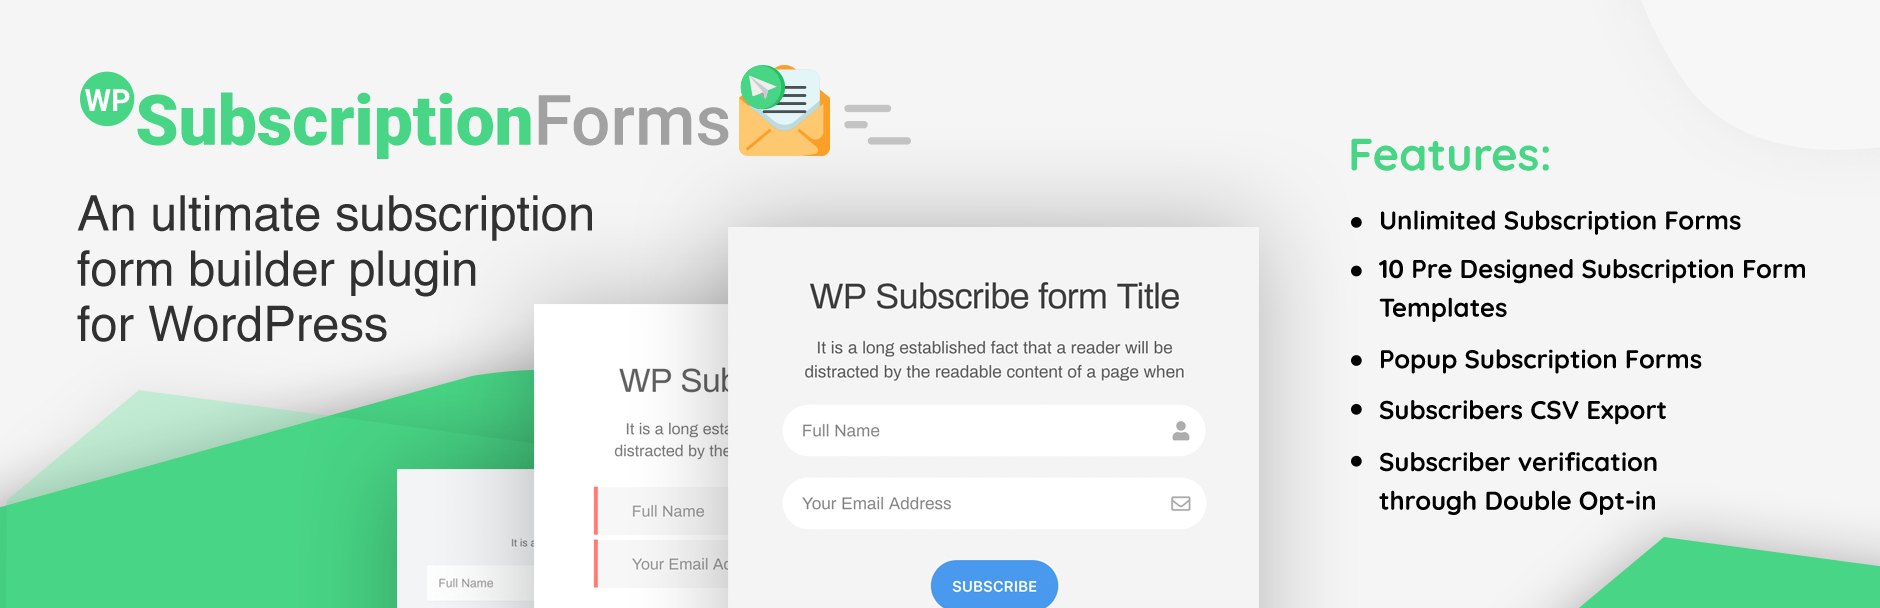 WP Subscription Forms – Subscription Form Plugin for WordPress